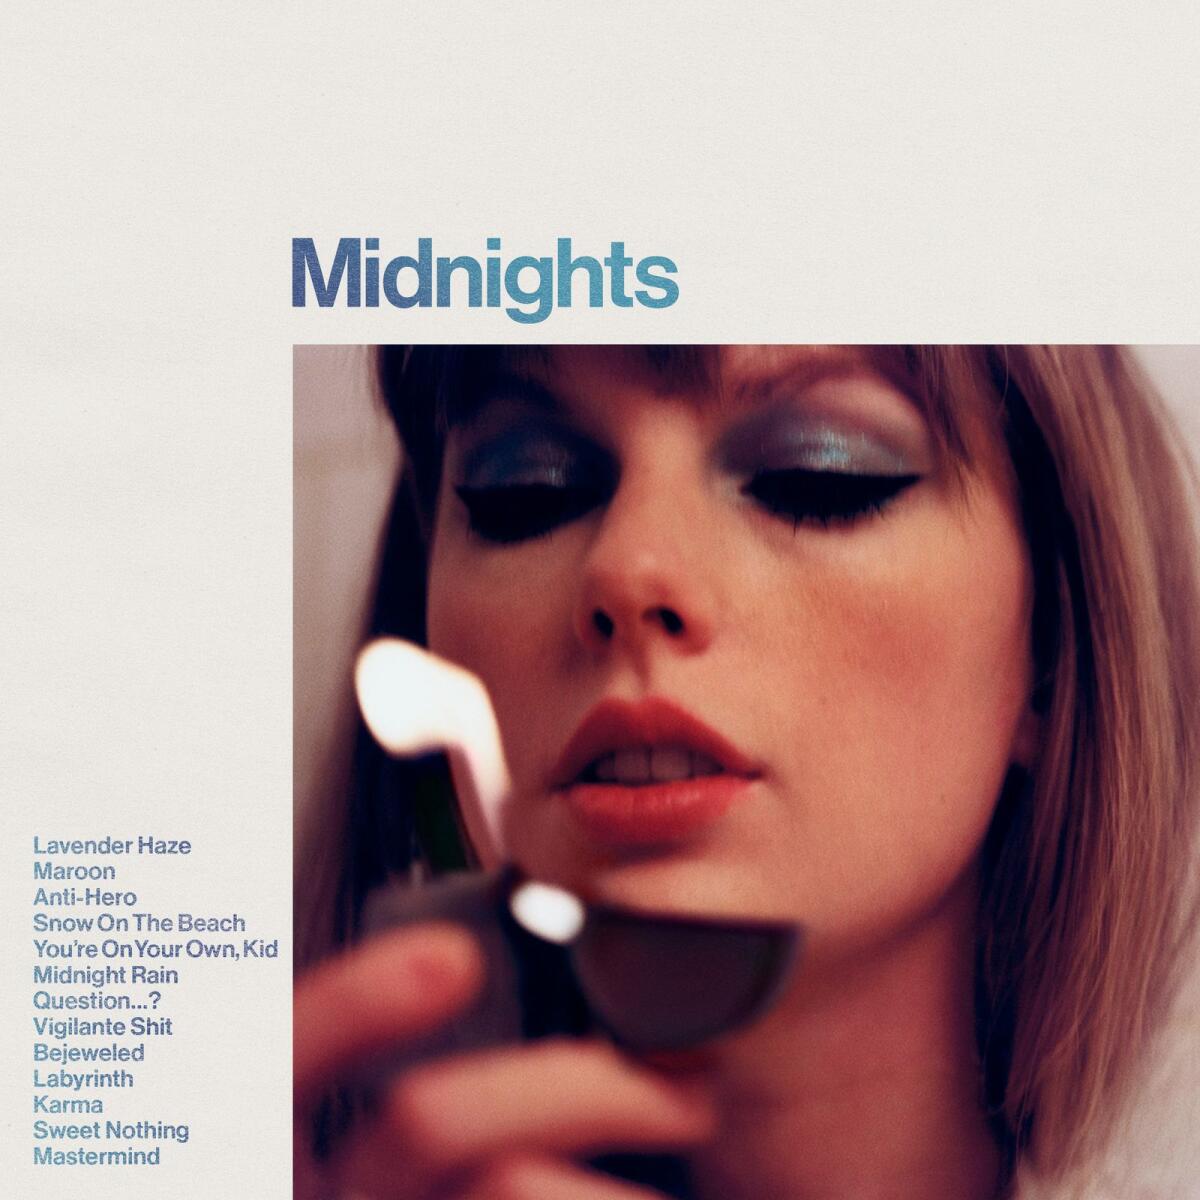 This image released by Republic Records shows 'Midnights' by Taylor Swift. (Republic Records via AP)